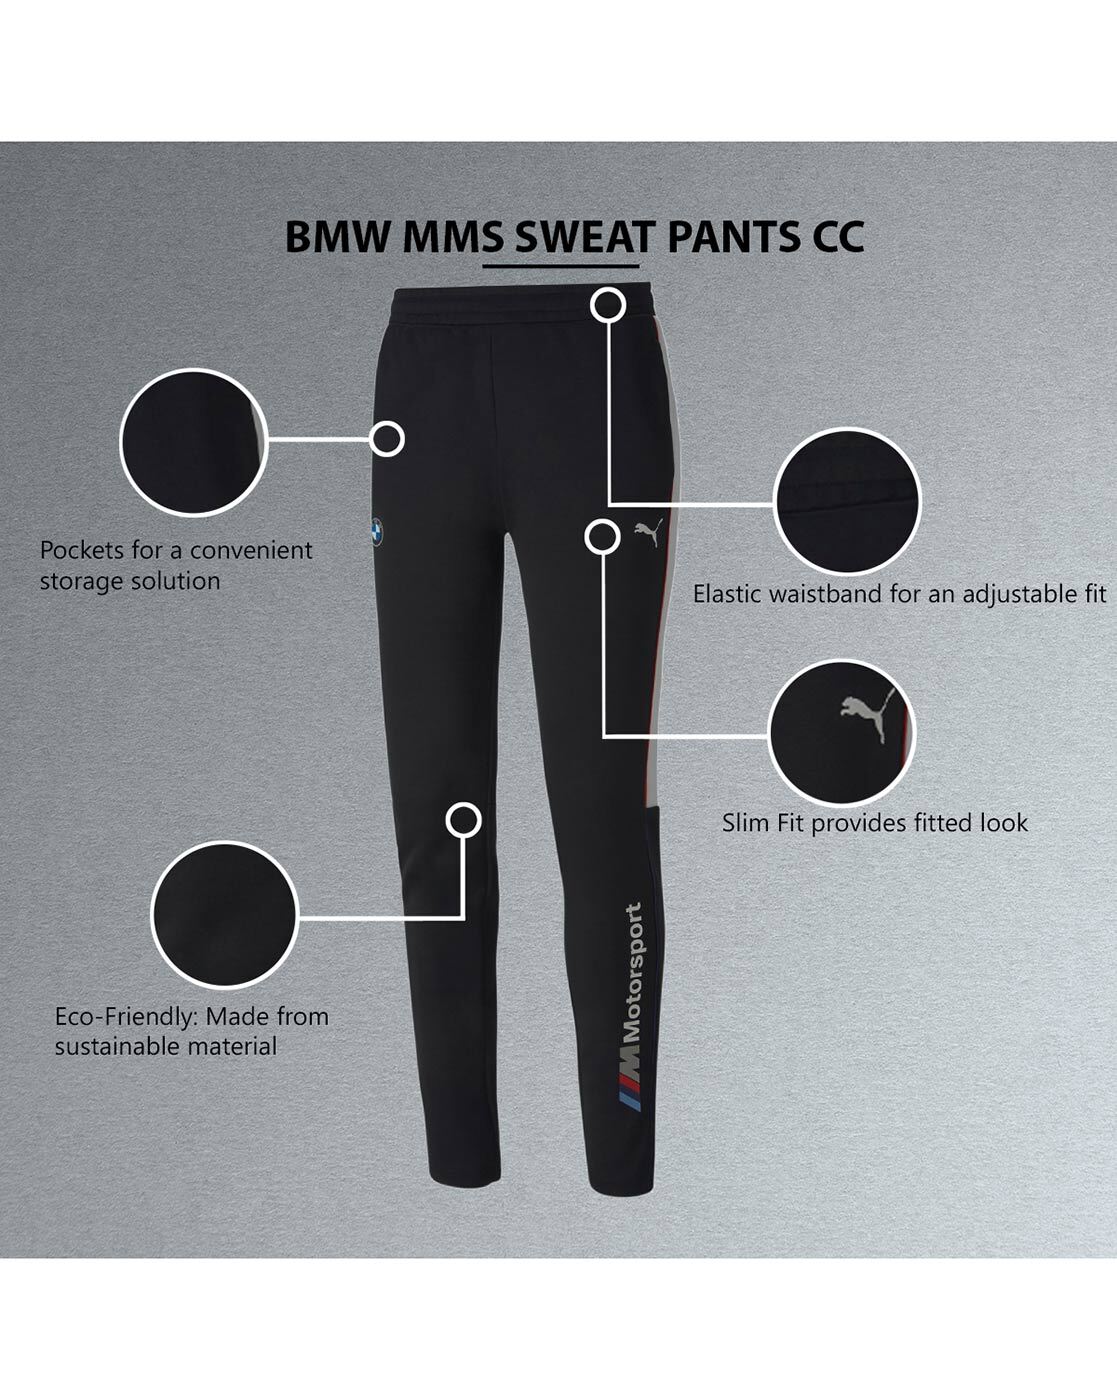 Fitted Track Pant in Meerut - Dealers, Manufacturers & Suppliers - Justdial